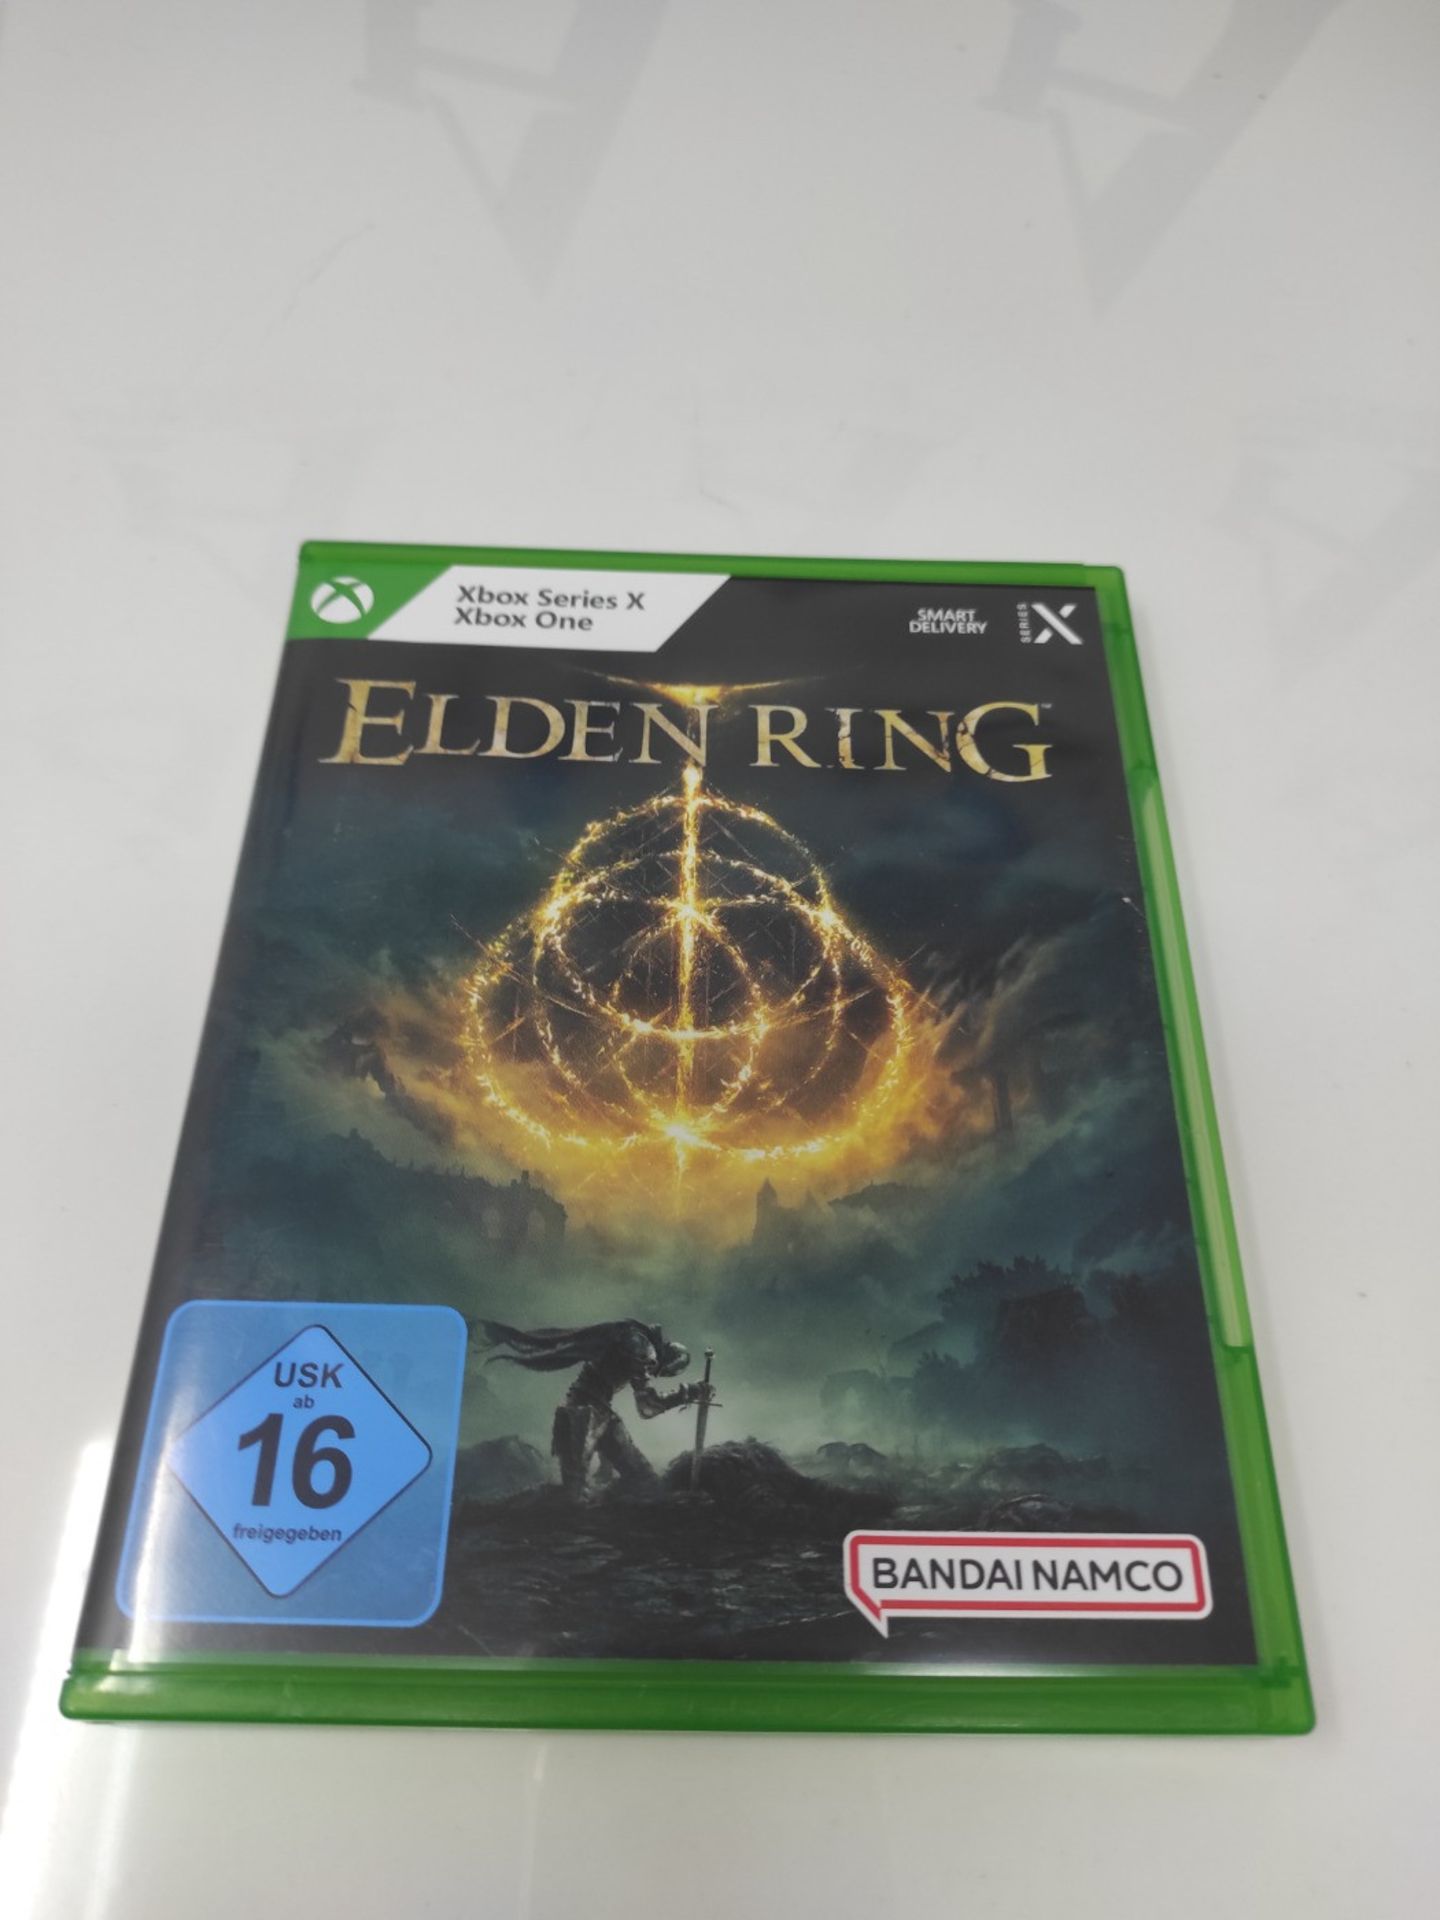 ELDEN RING - Standard Edition [Xbox One] | Free upgrade to Xbox Series X - Image 2 of 6